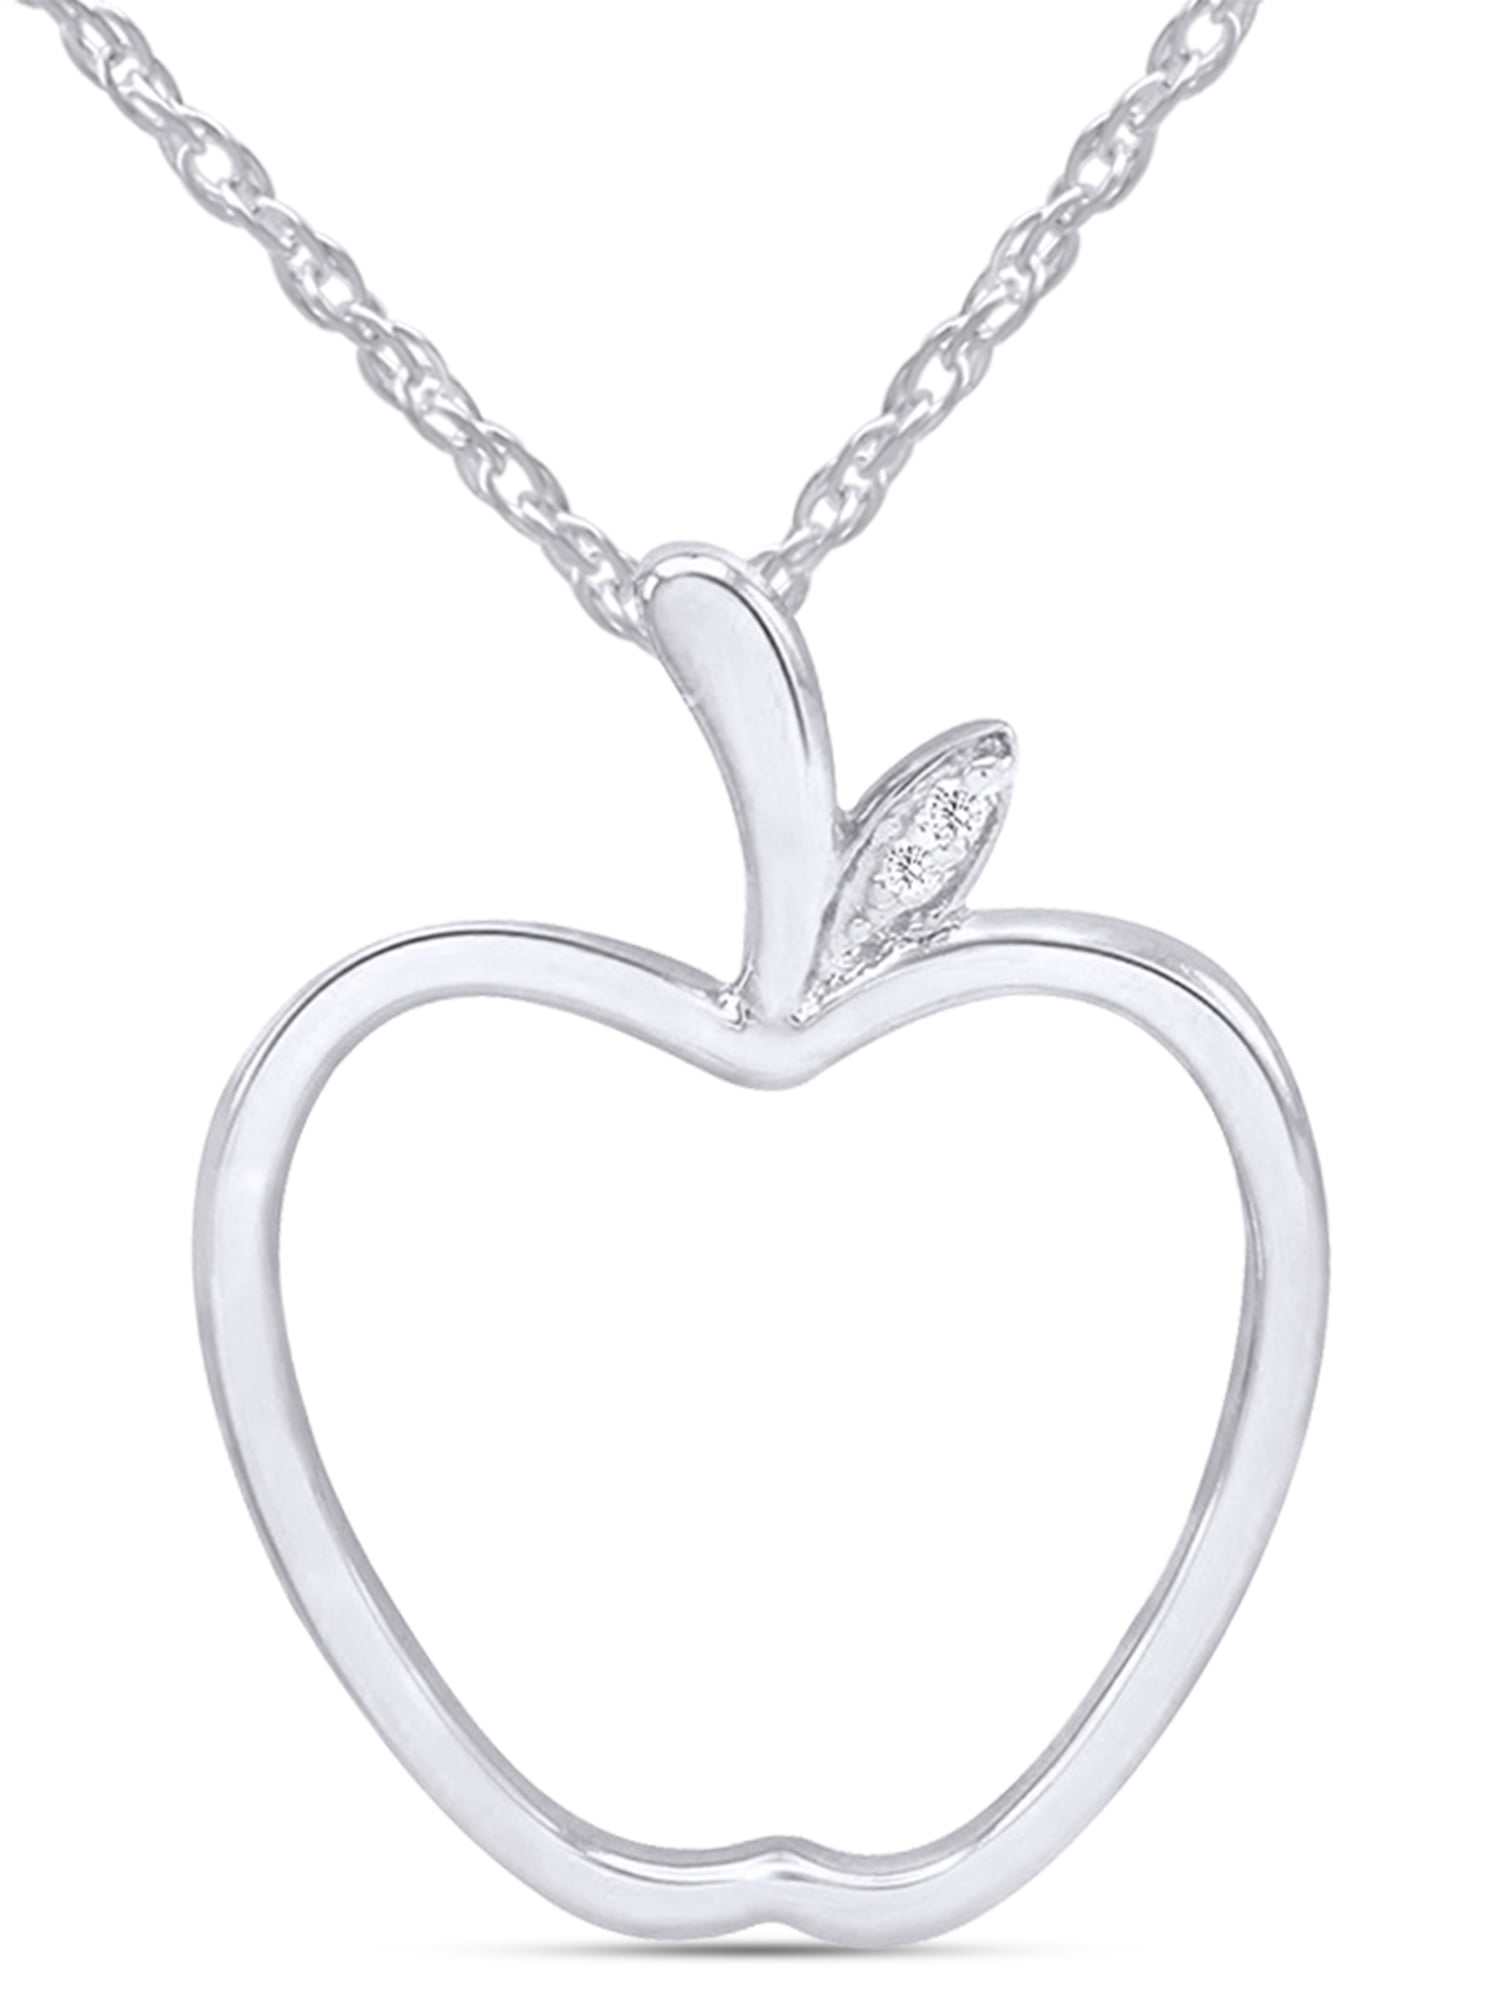 Wishrocks Round Cut White Cubic Zirconia Solitaire Pendant Necklace in 14K Gold Over Sterling Silver